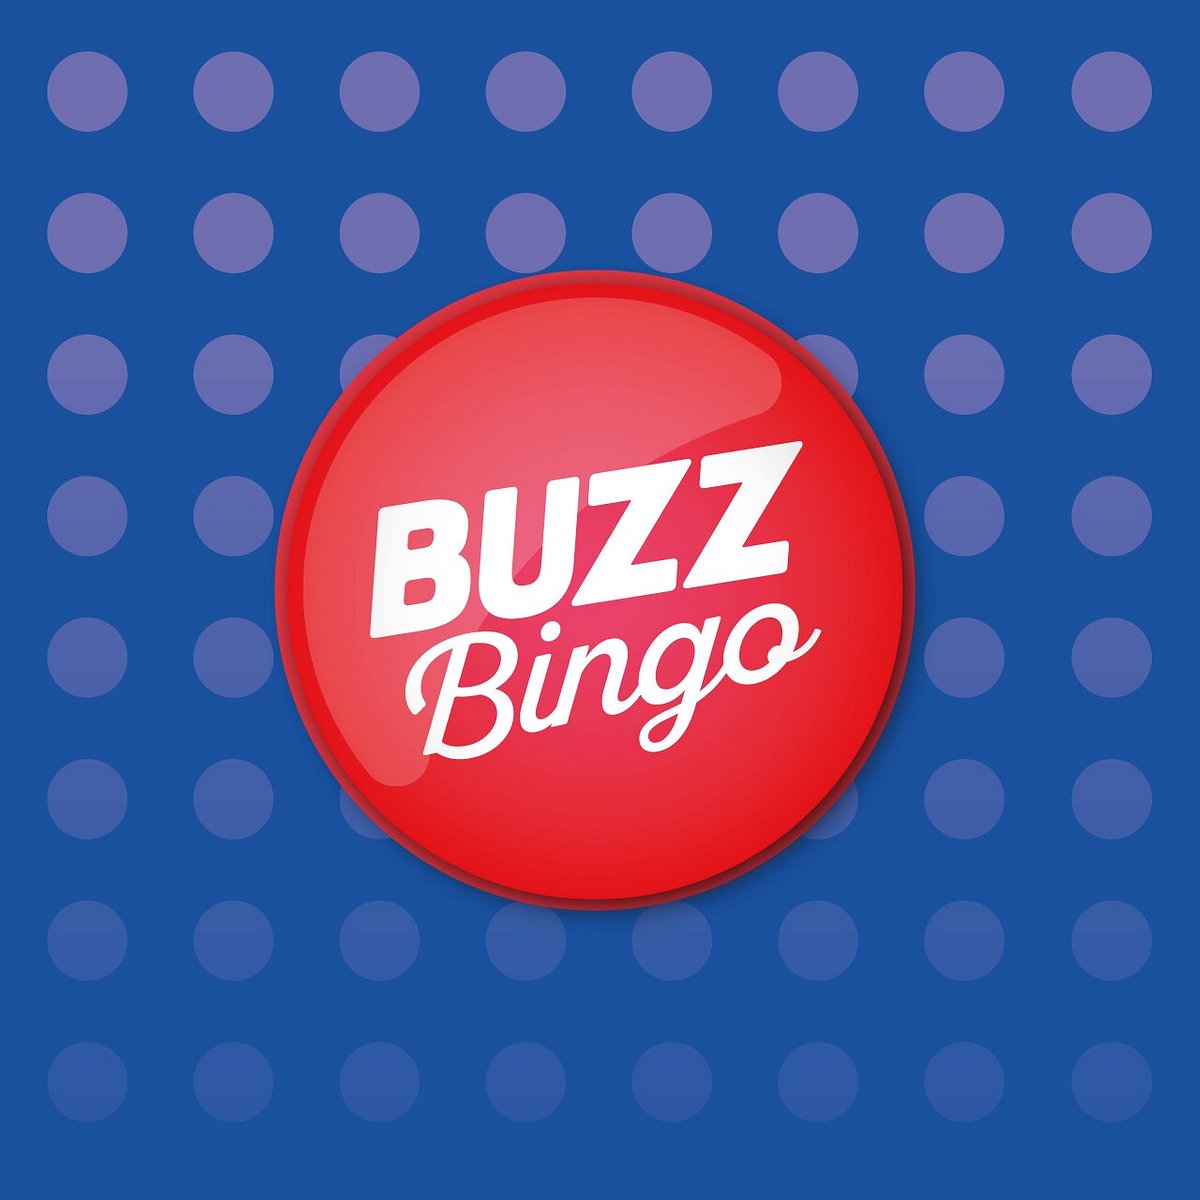 A blue square background with purple dots. Then a red circle with white Buzz Bingo words.